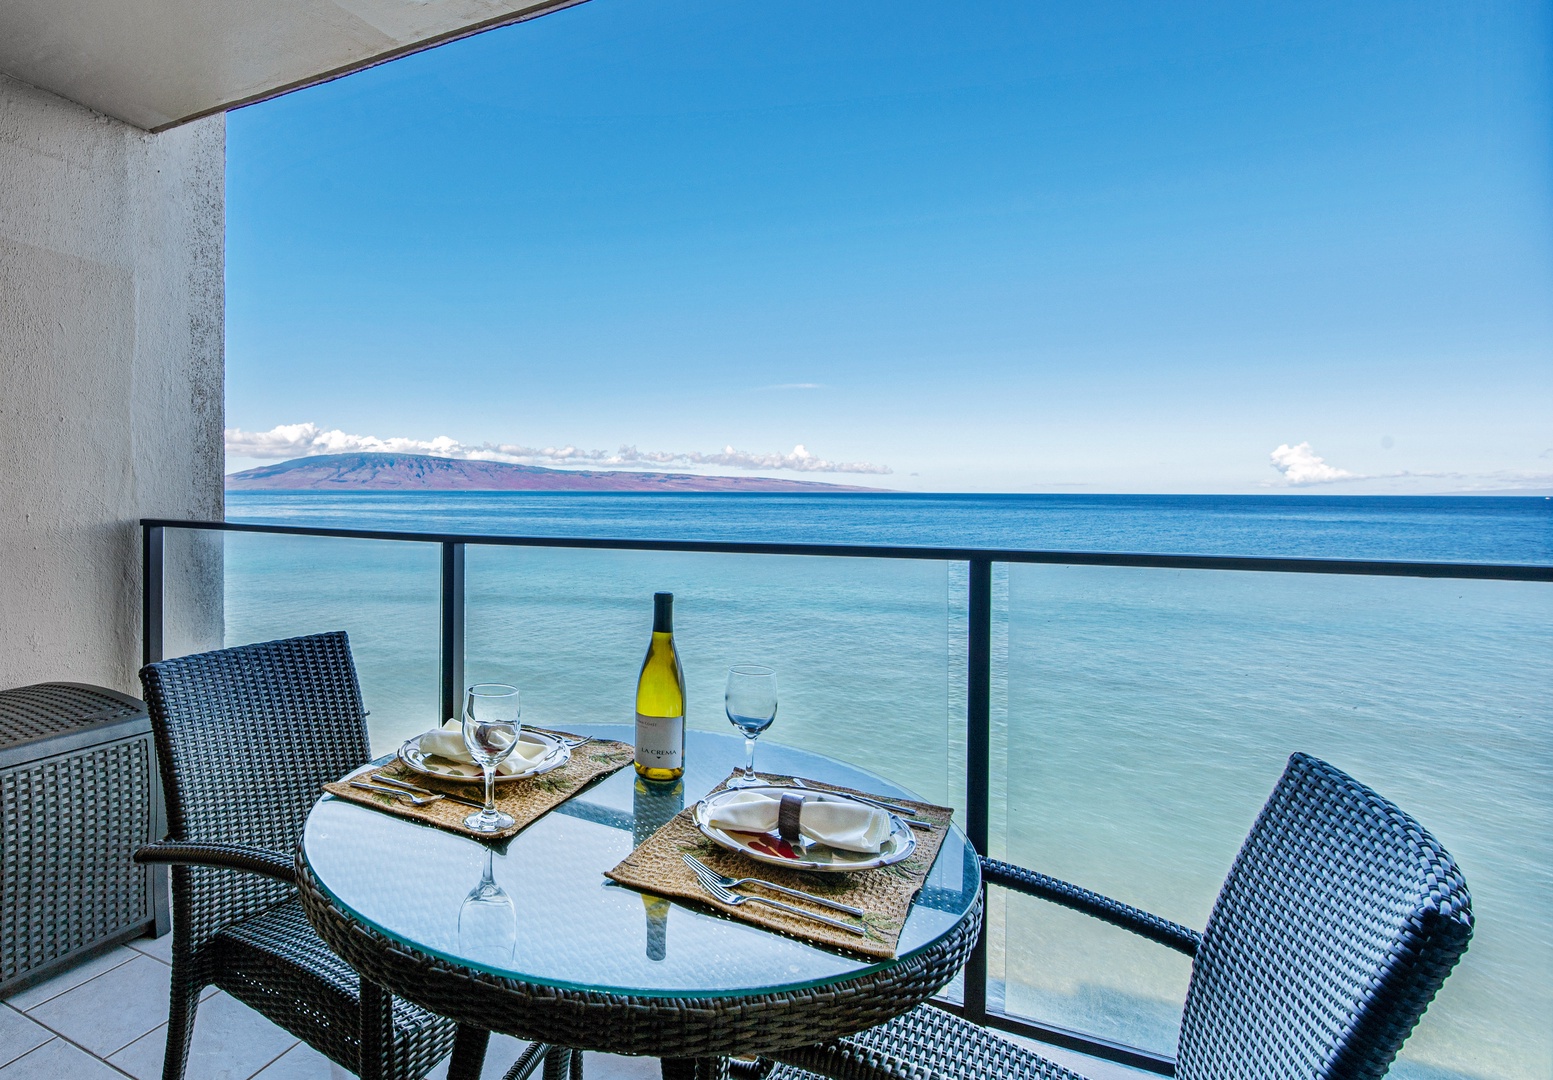 Immerse yourself in the breathtaking ocean views